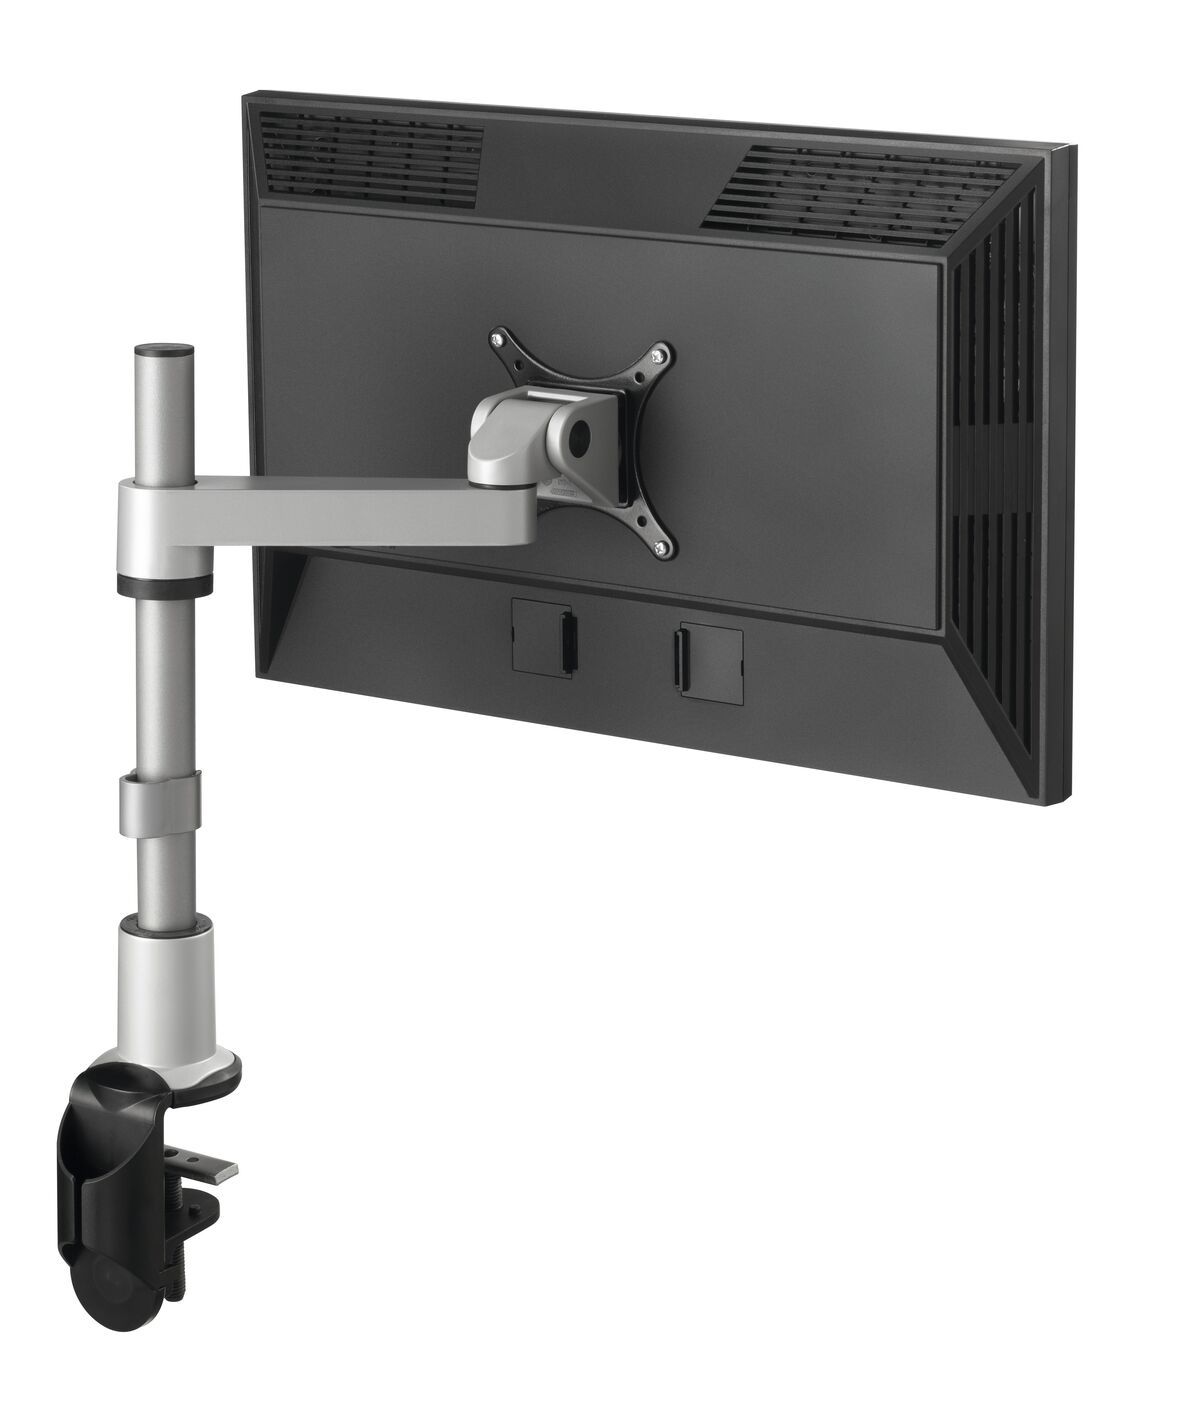 Vogel's PFD 8522 Monitor Arm static (silver) - For monitors up to Application